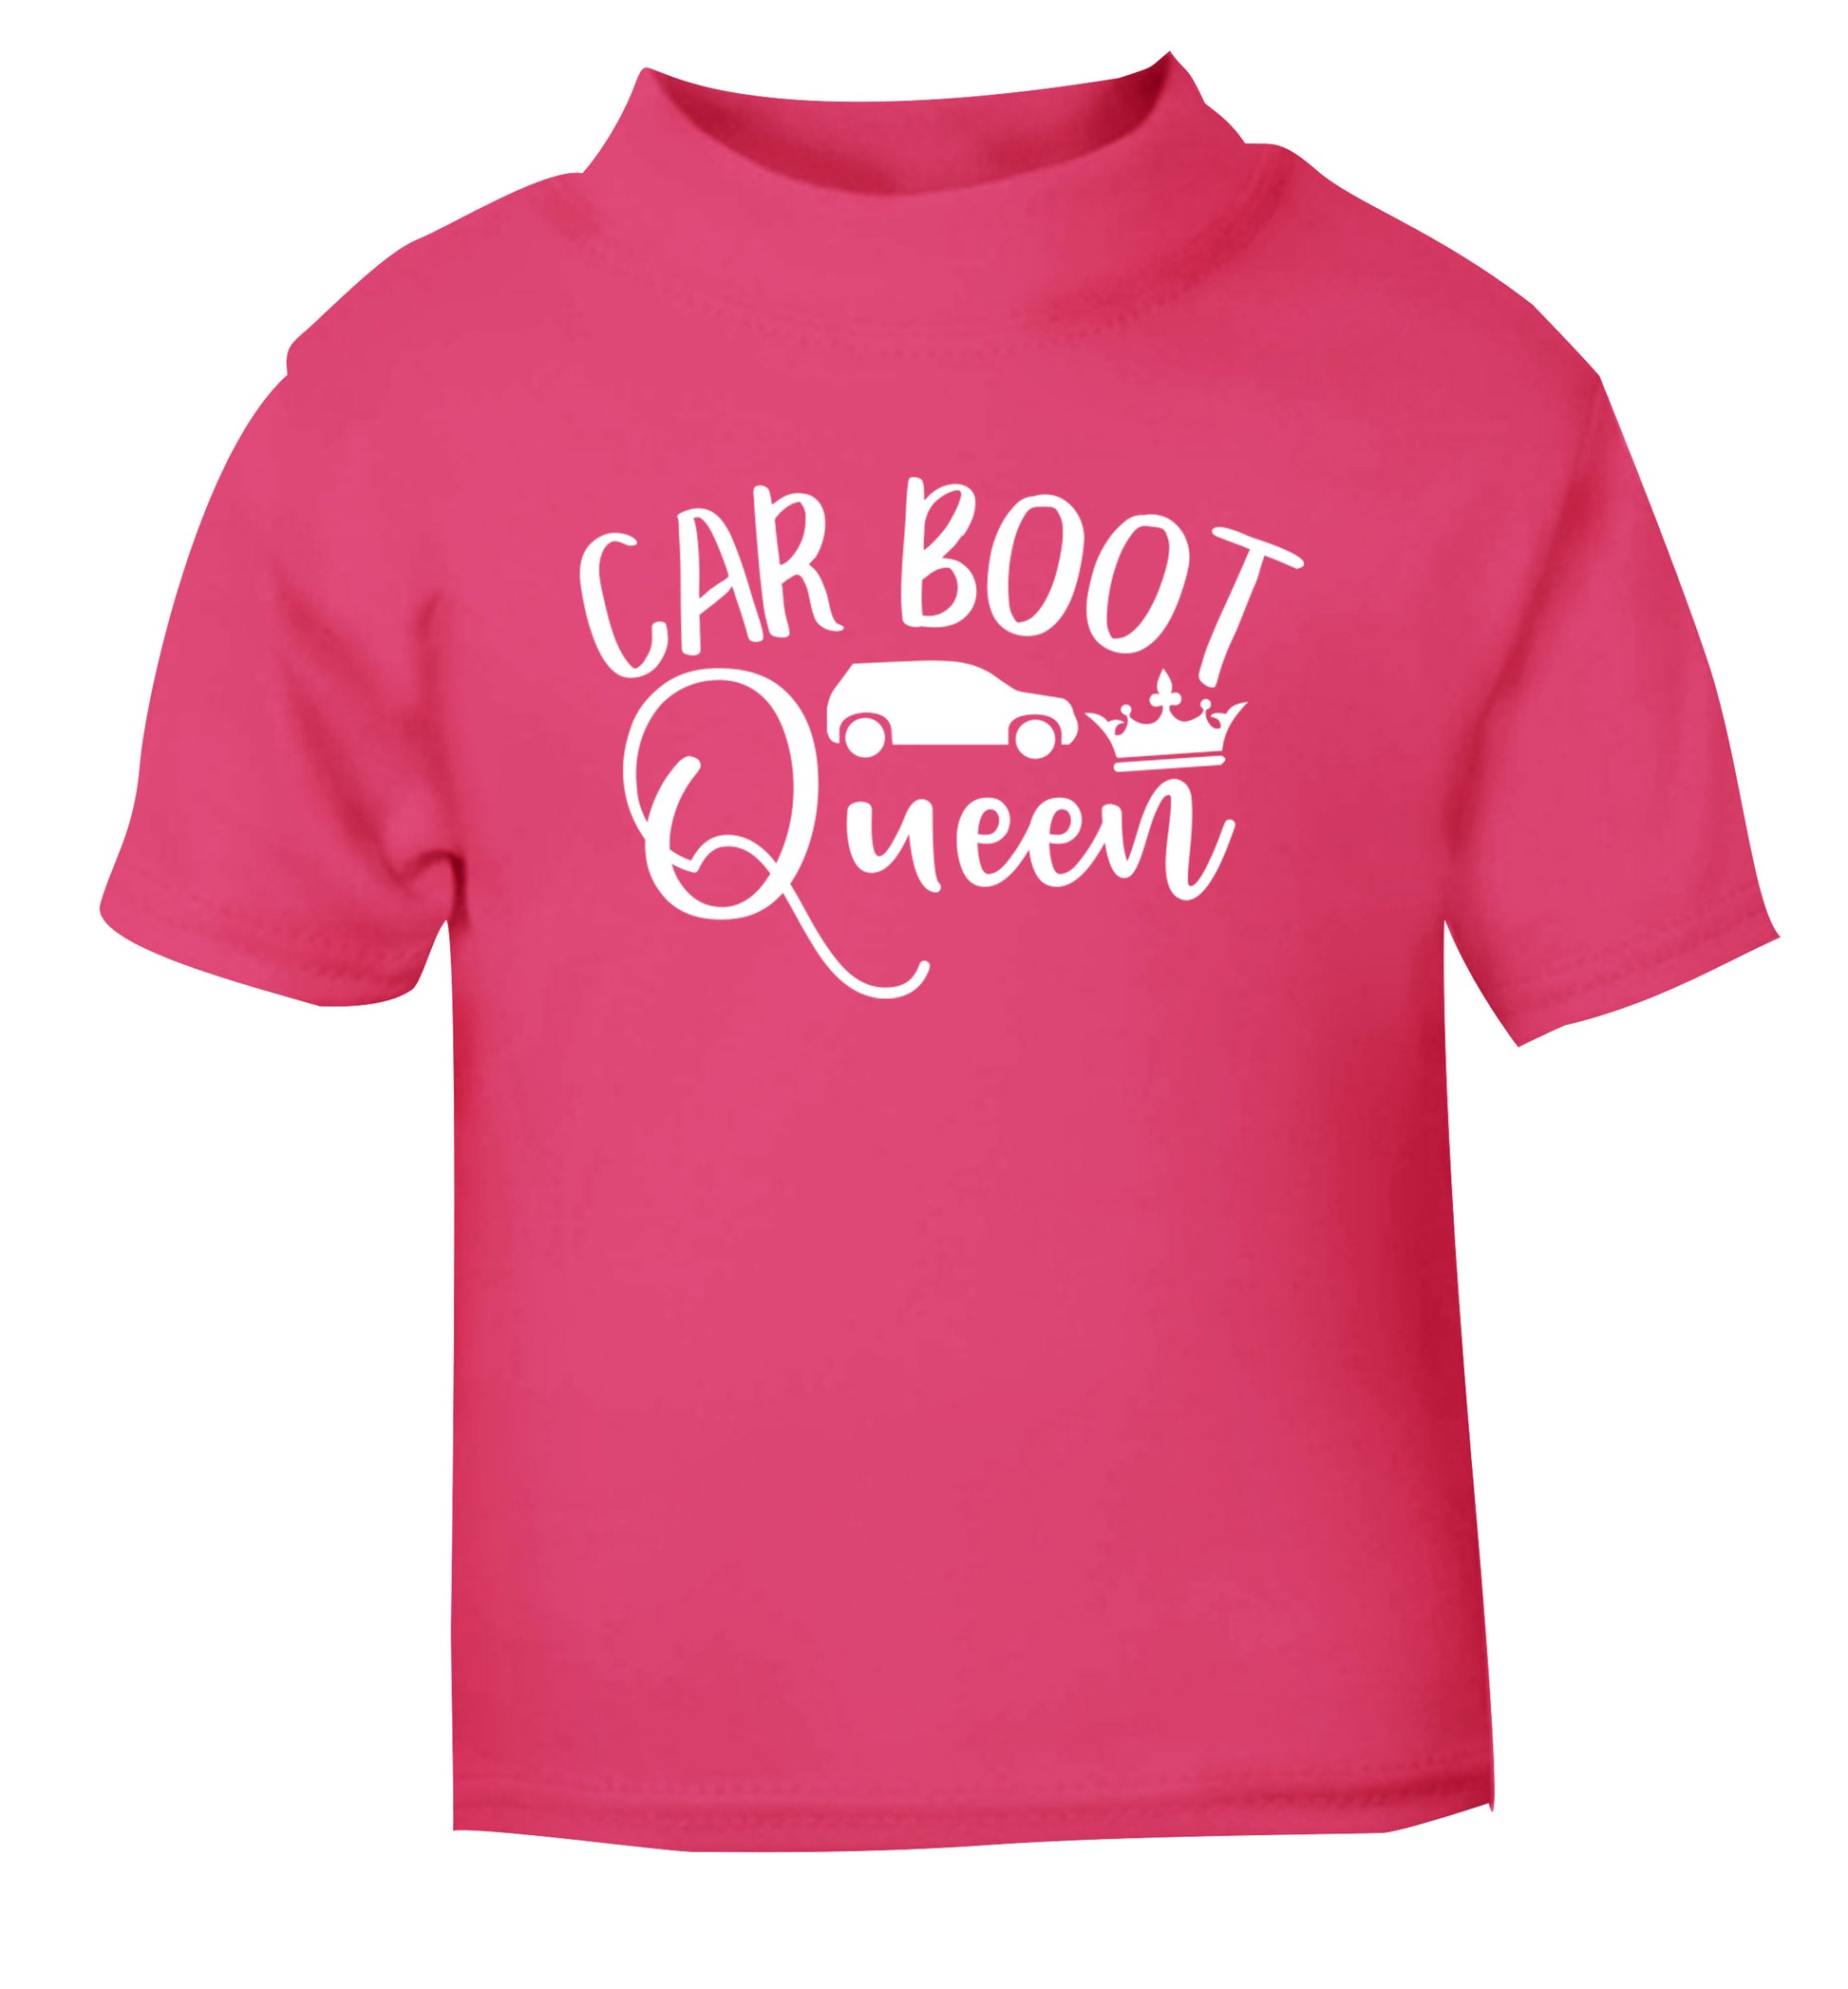 Carboot Queen pink Baby Toddler Tshirt 2 Years